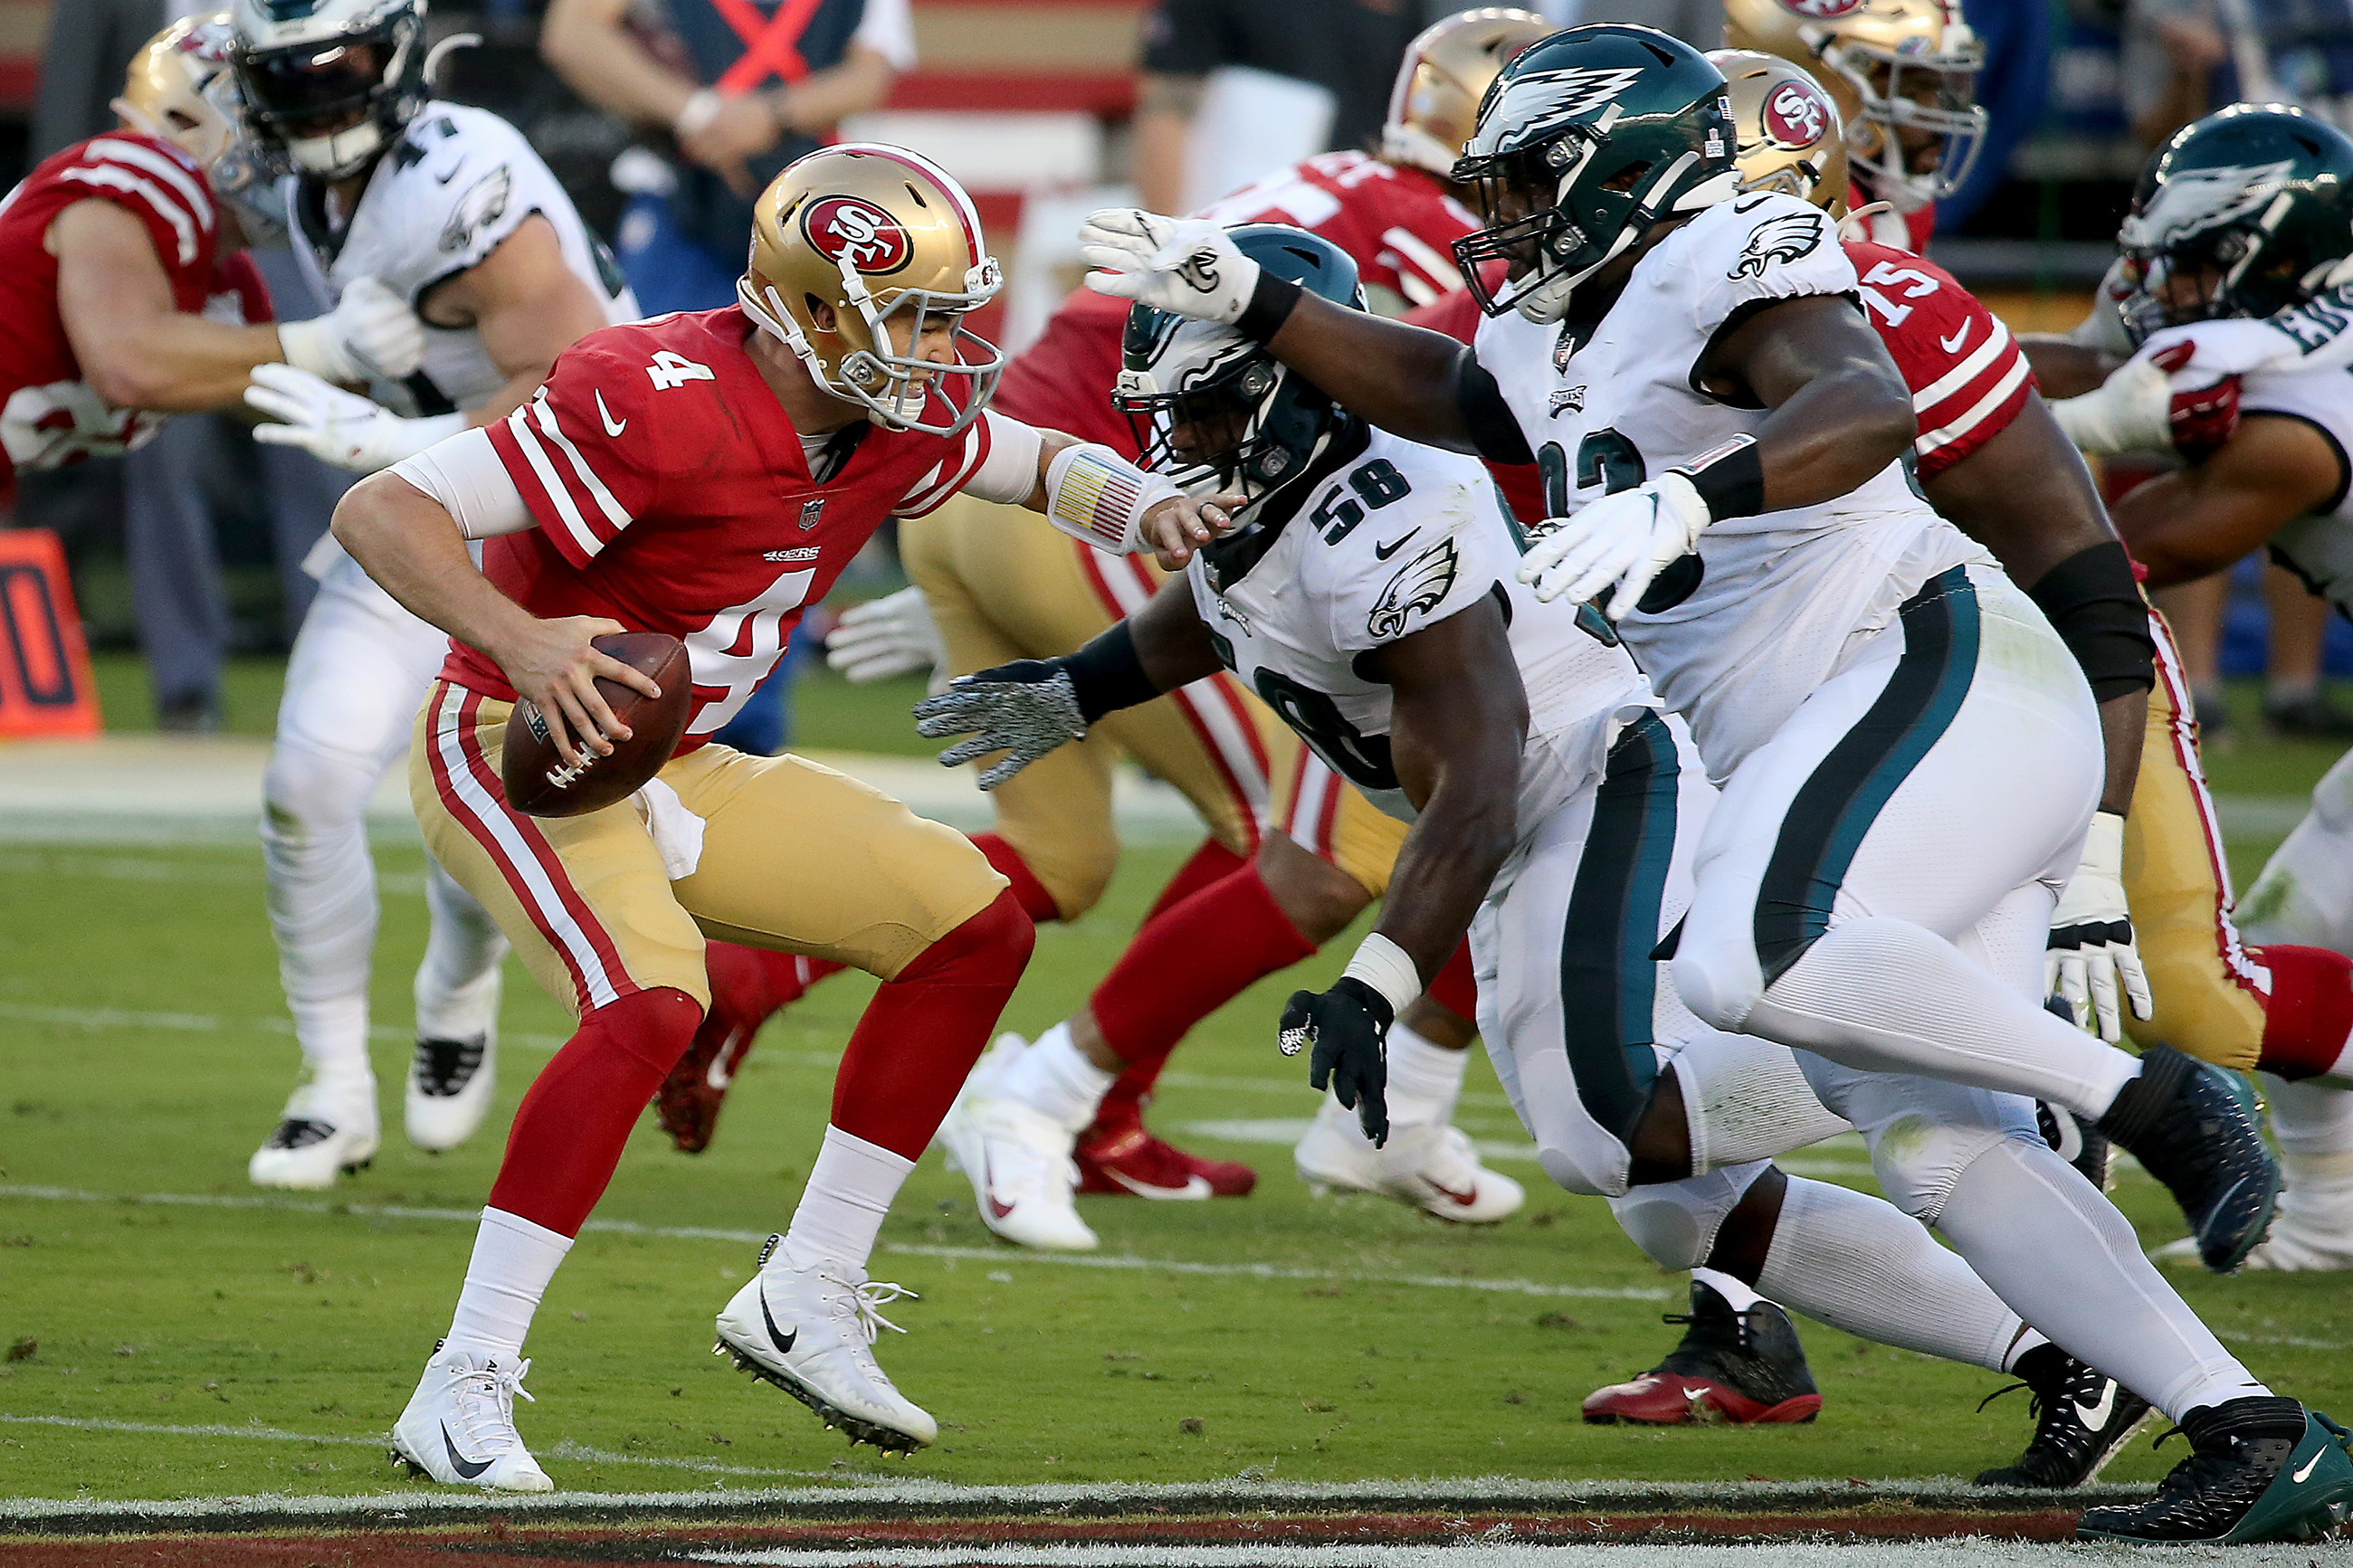 Eagles, Niners both aim for a 2-0 start - The San Diego Union-Tribune